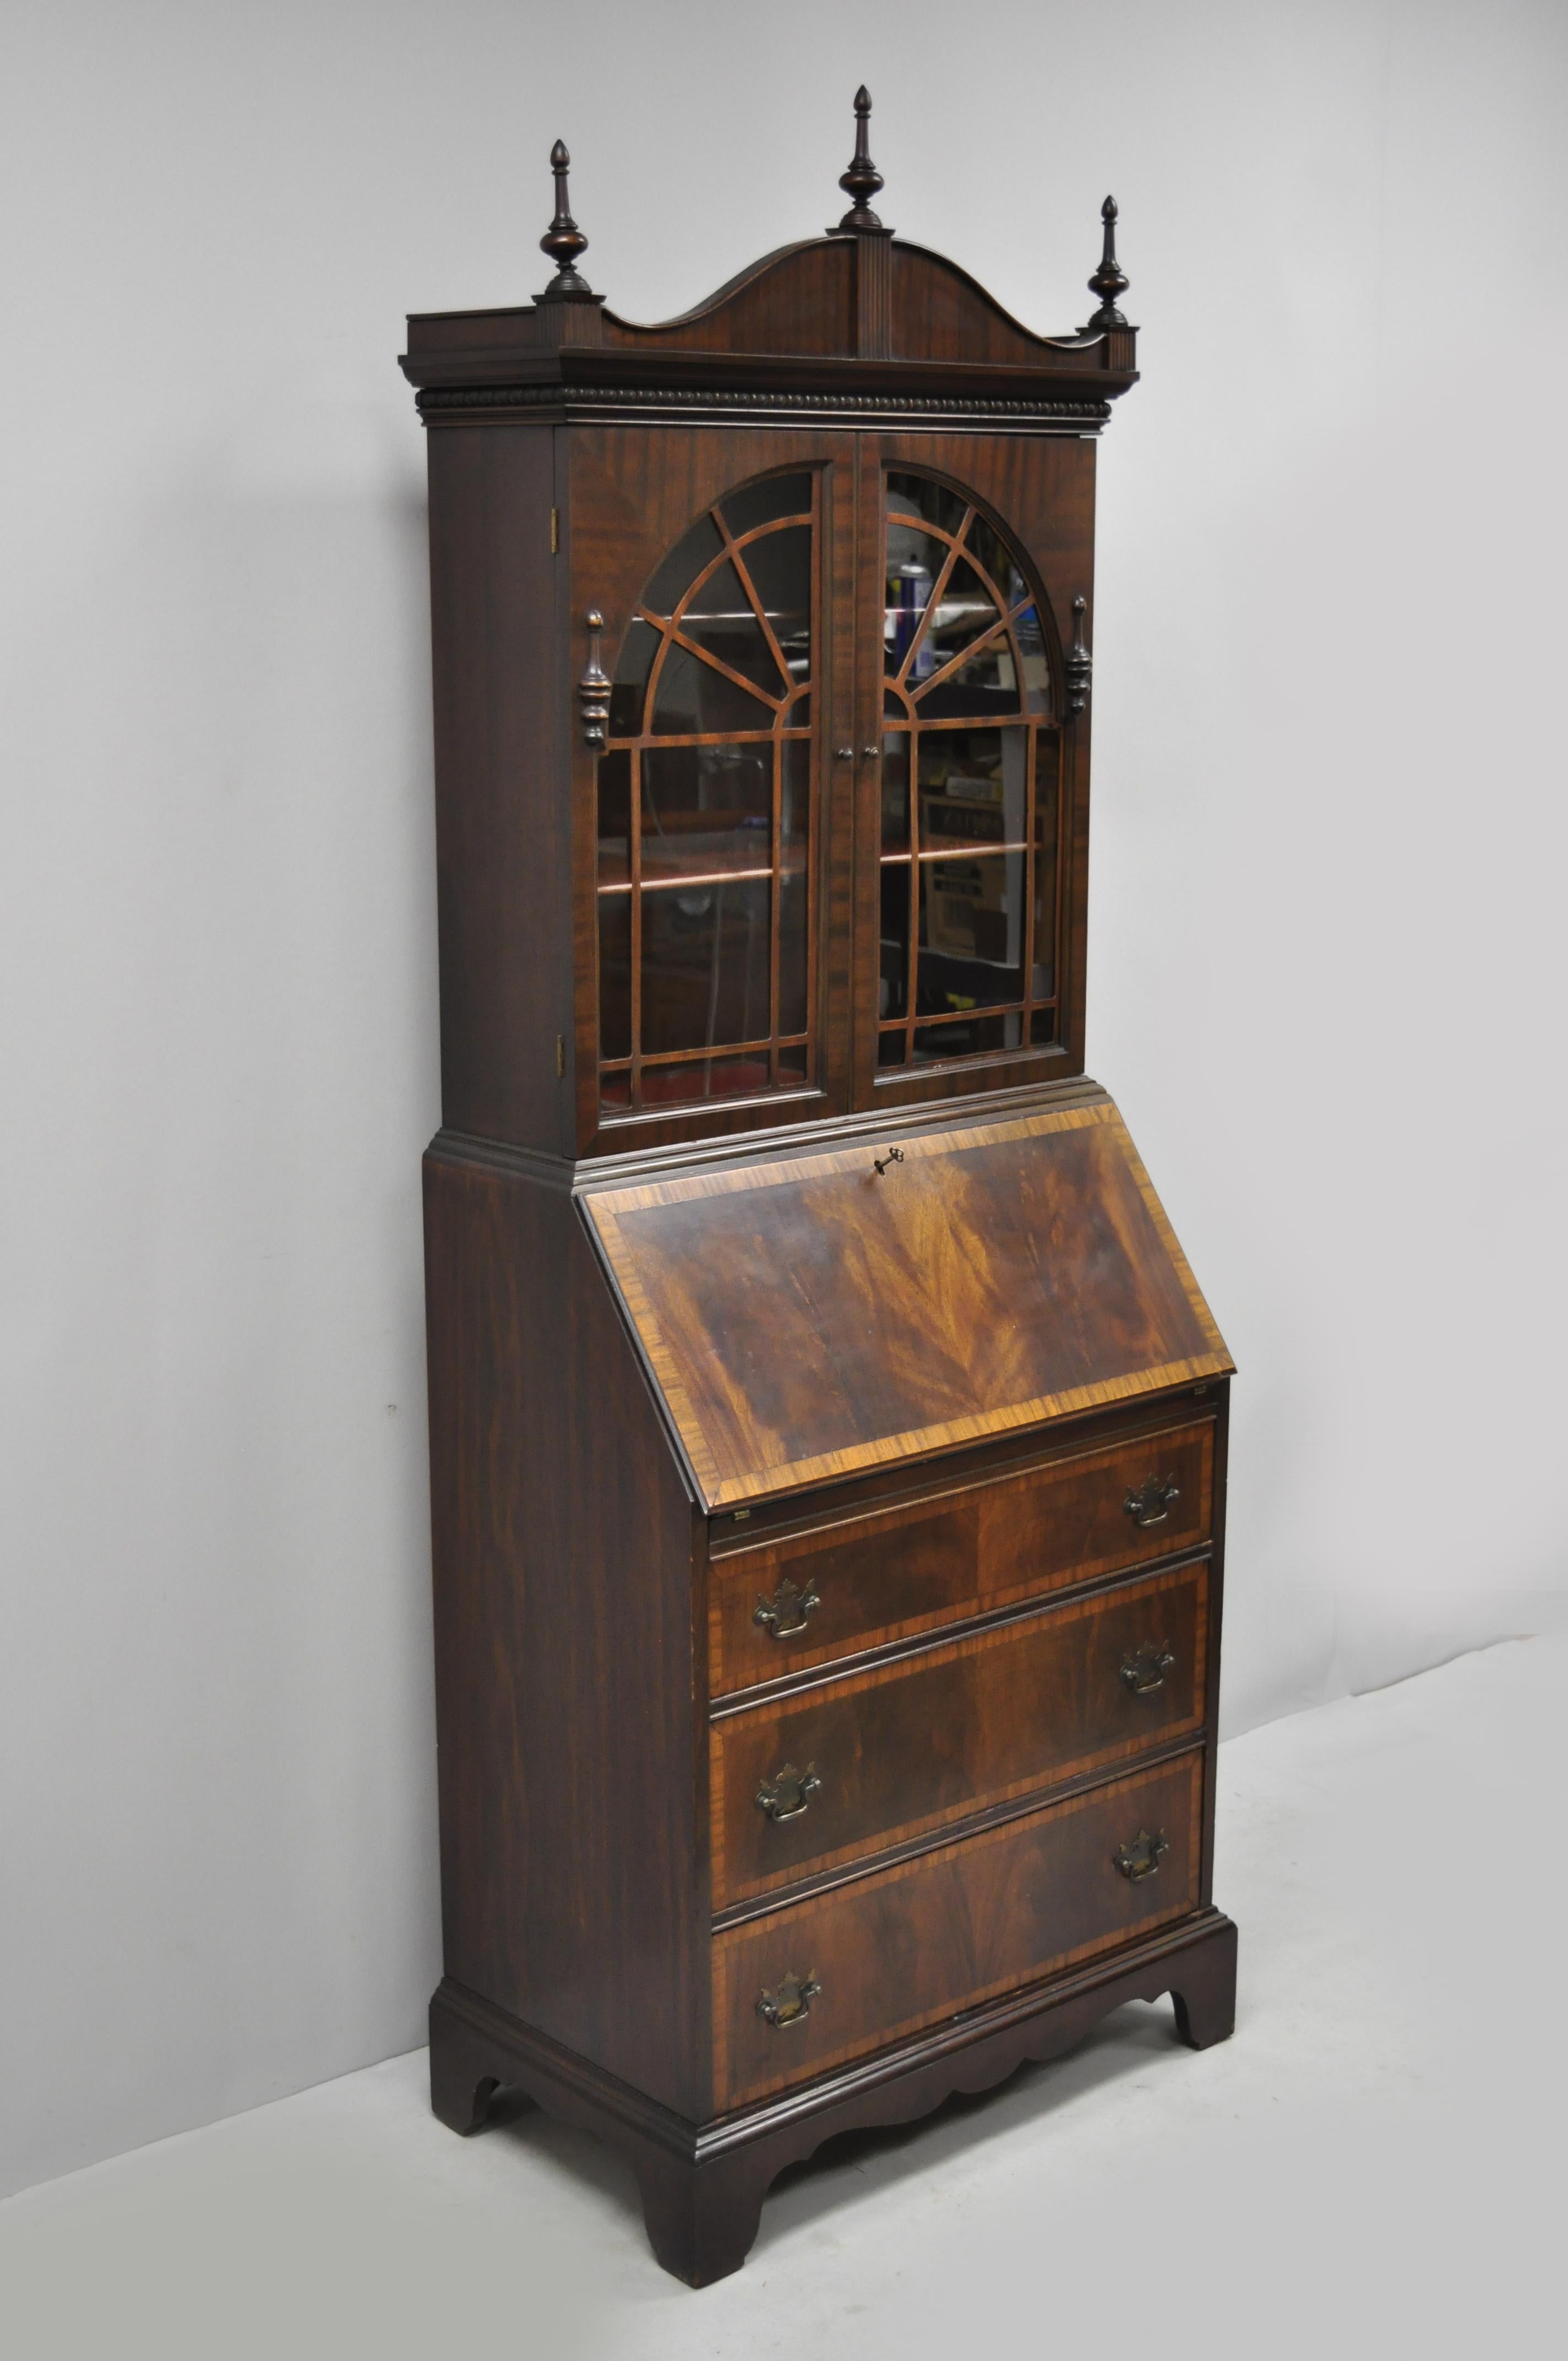 Antique mahogany Federal Chippendale style secretary desk with banded front. Item features banded front, beautiful wood grain, 2 swing doors, working lock and key, 3 dovetailed drawers, 2 wooden shelves, quality American craftsmanship, circa early